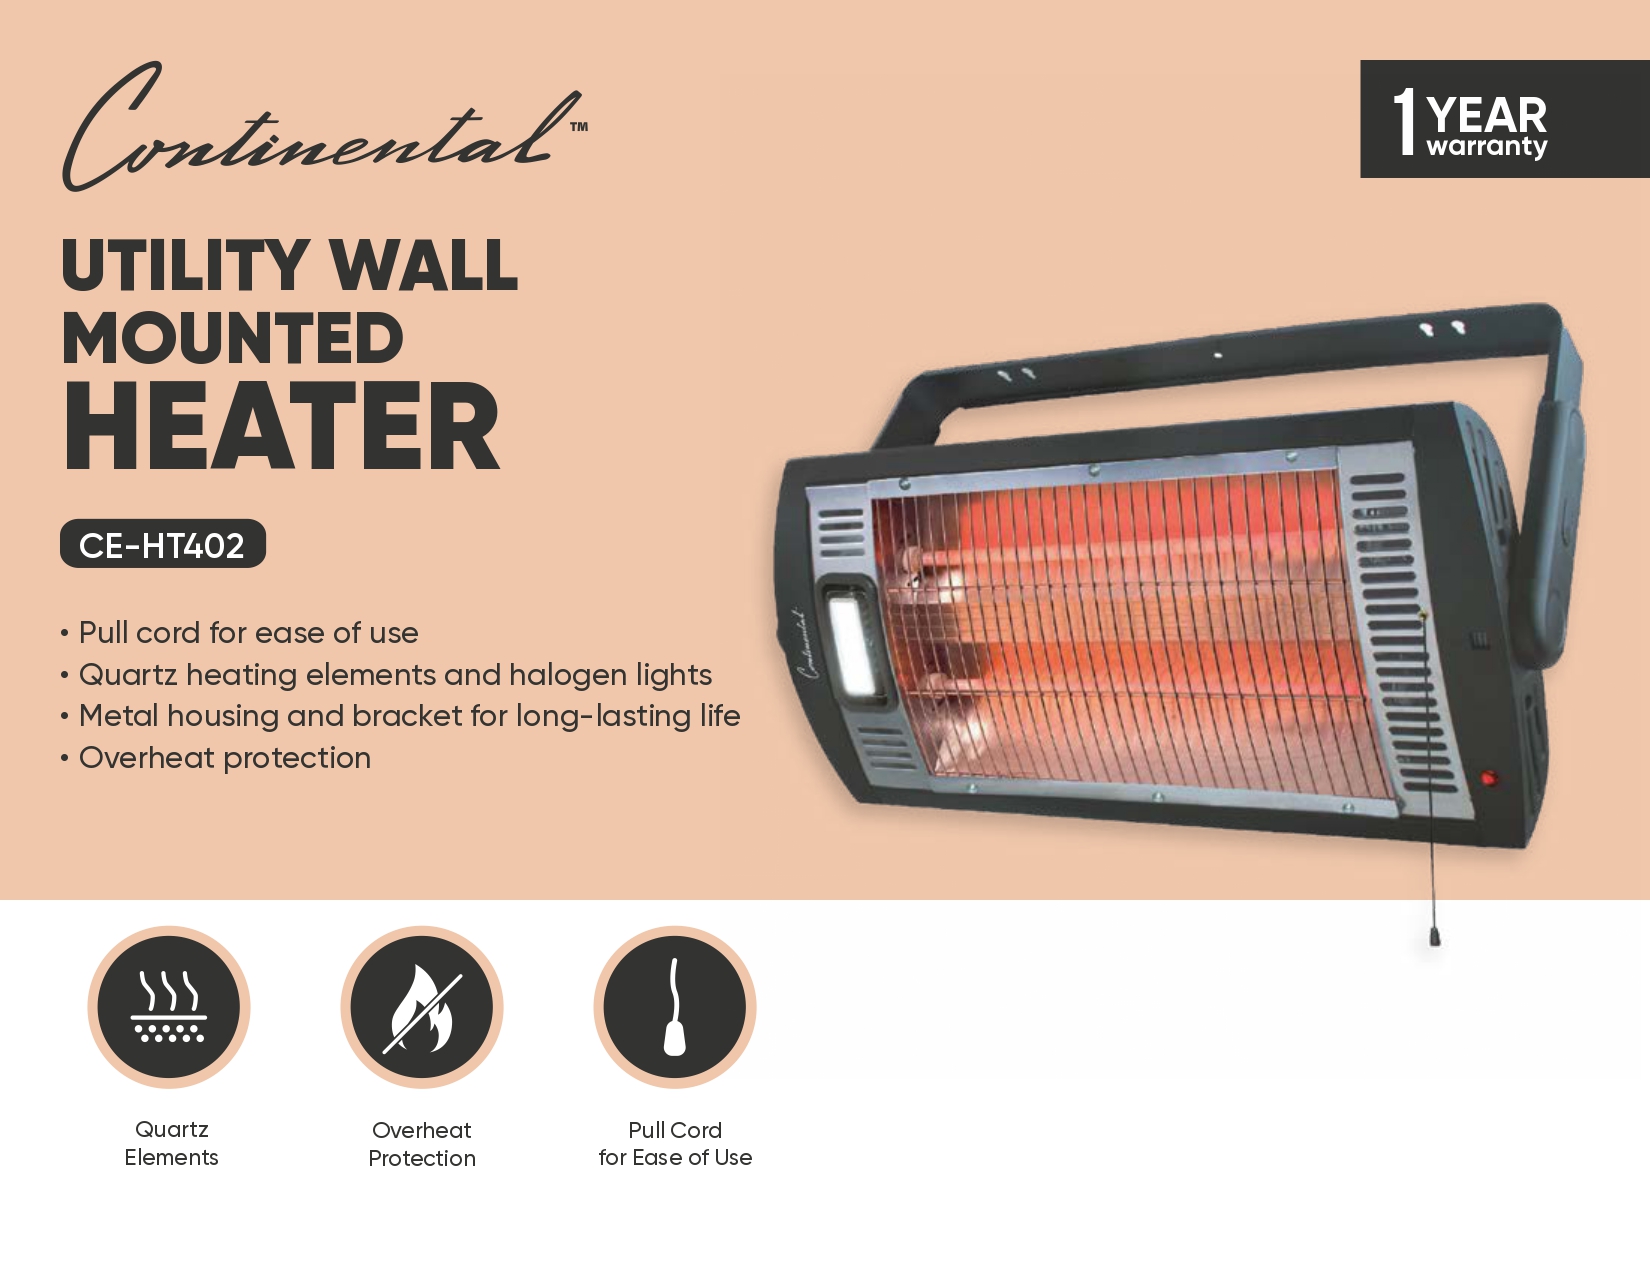 Utility Wall Mounted Heater